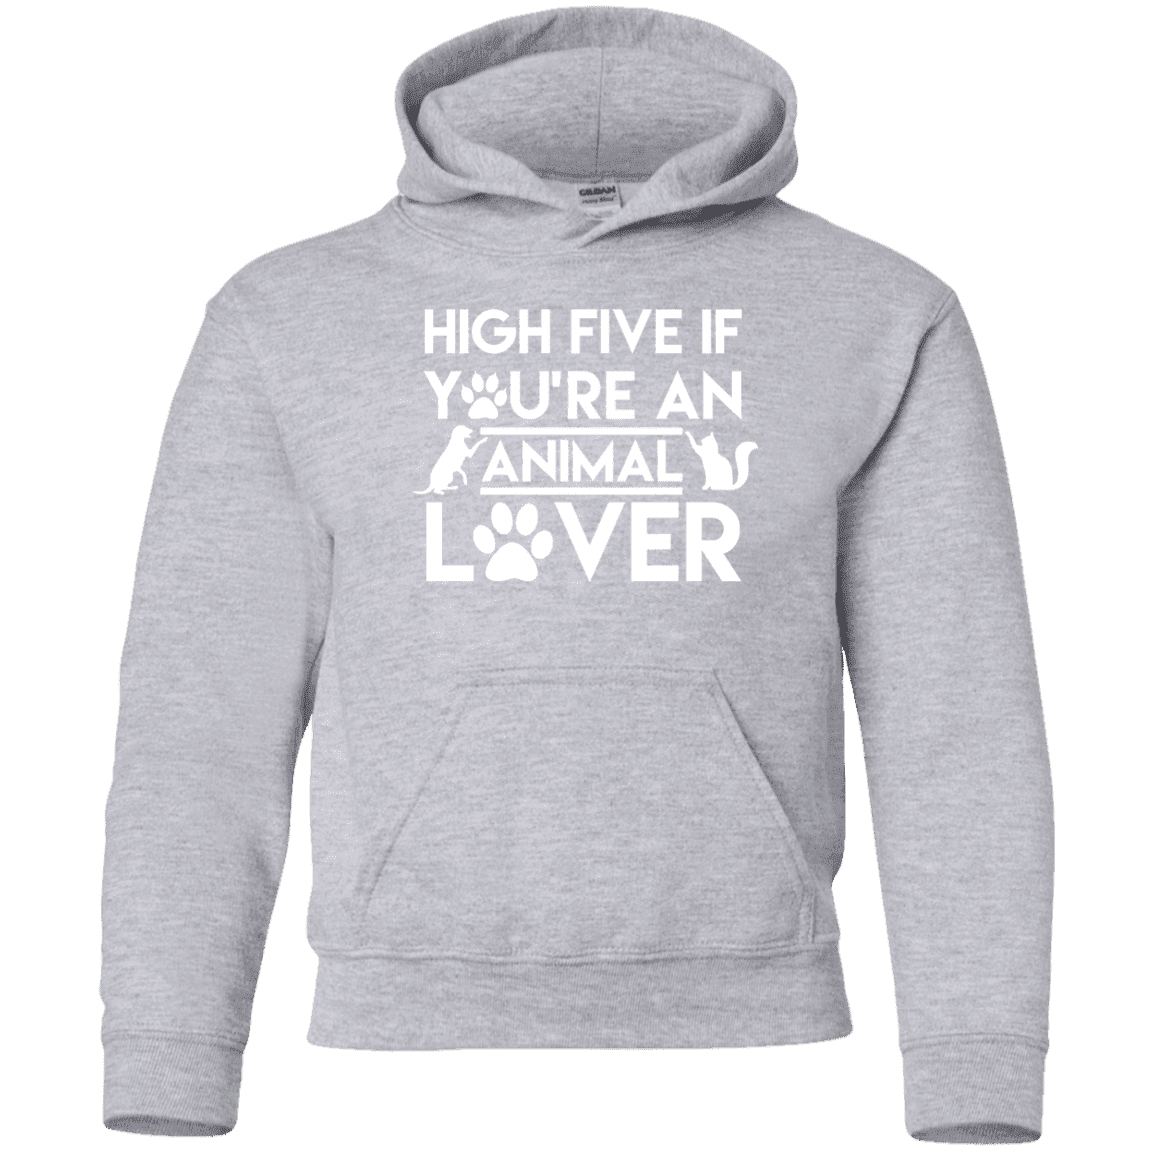 High Five If You're An Animal Lover - Youth Hoodie.